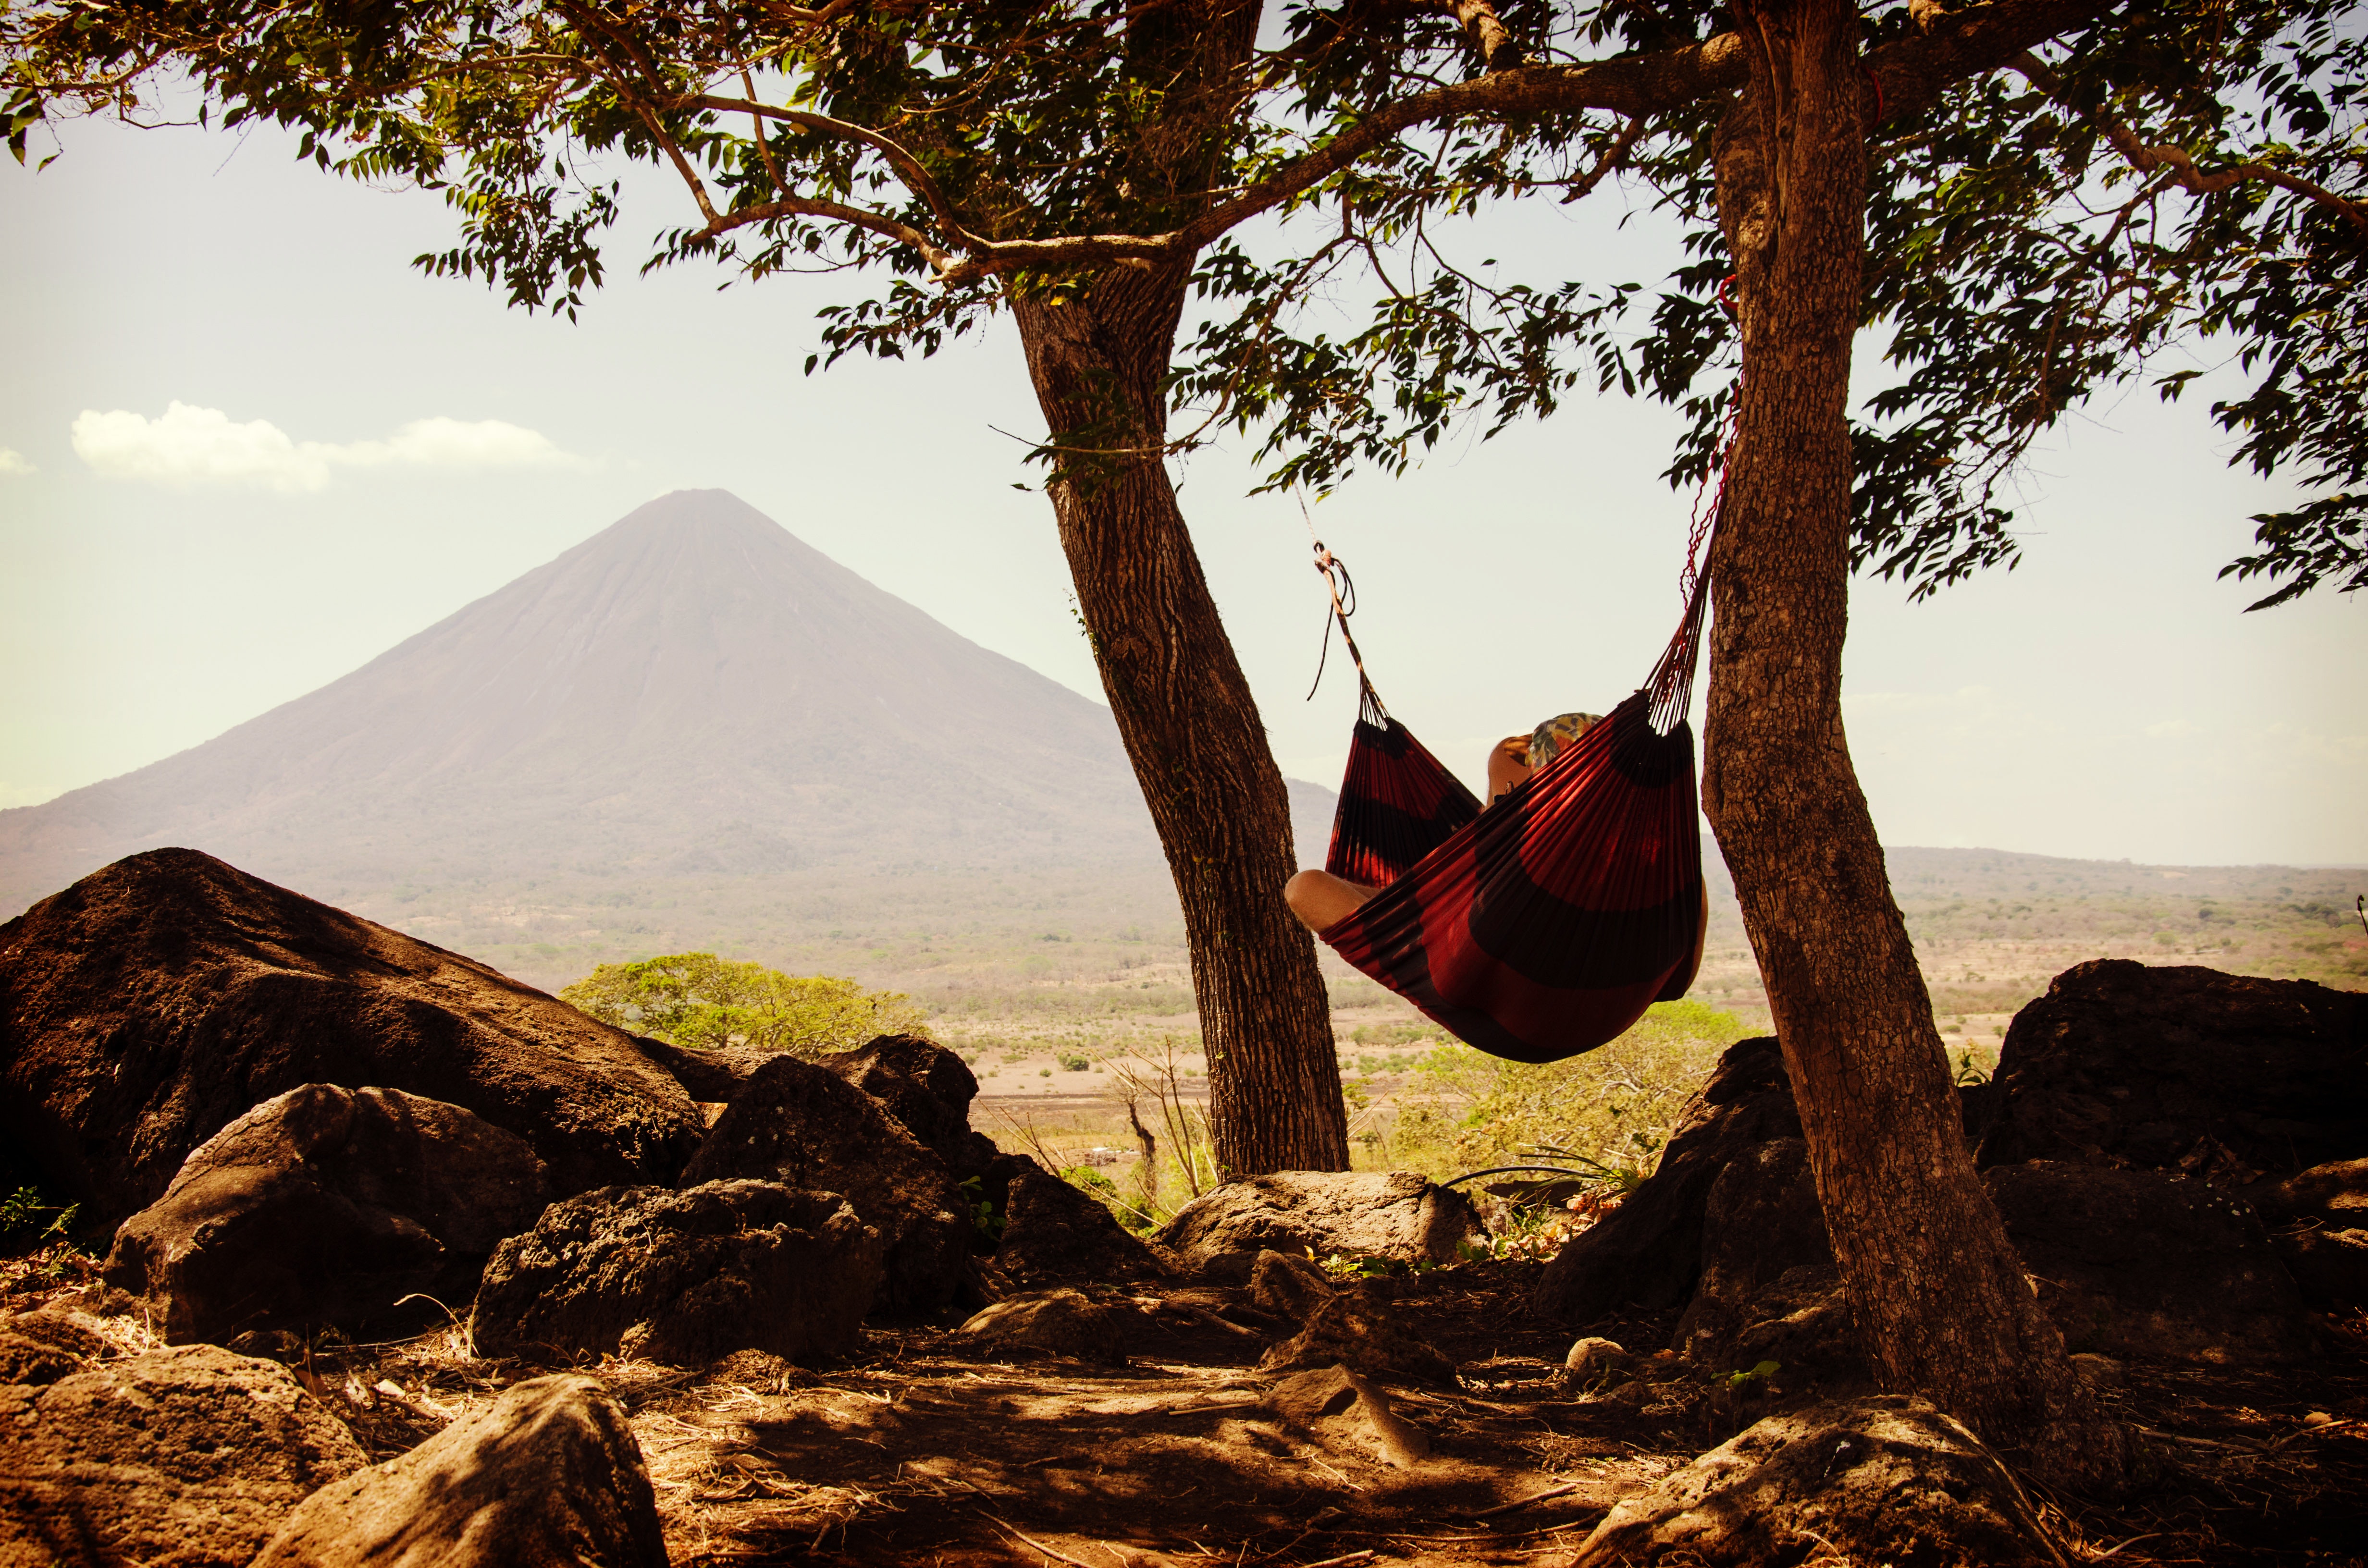 Person lying on black and red hammock beside mountain under white cloudy sky during daytime photo